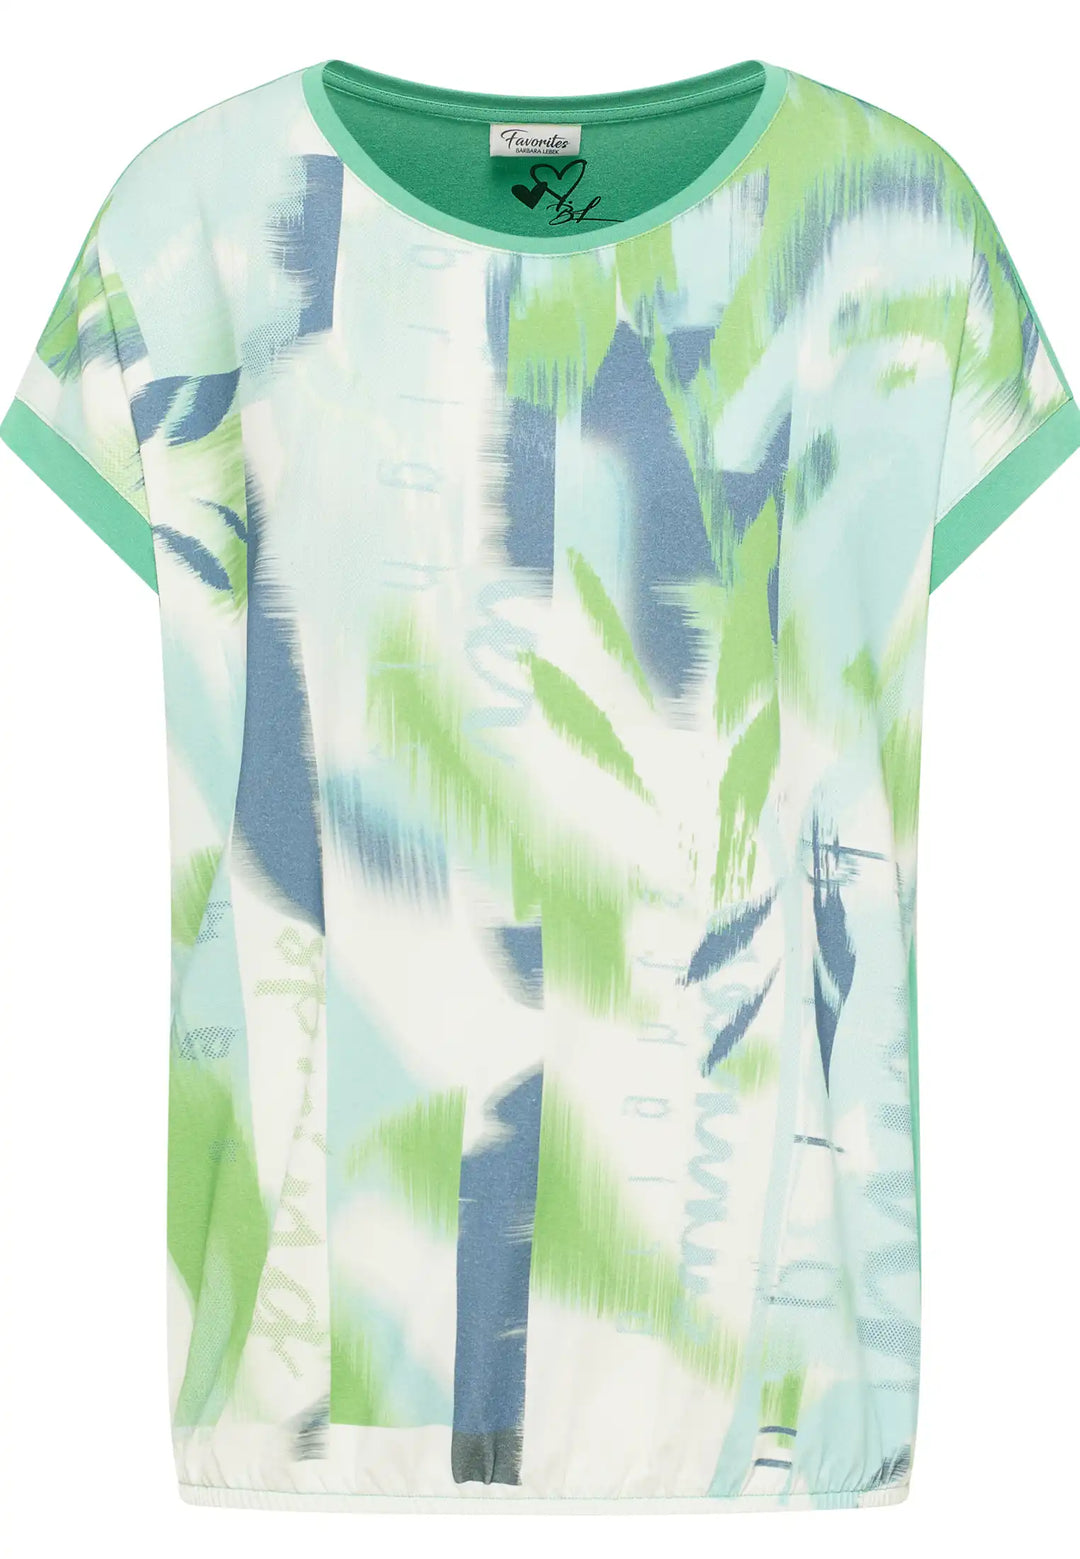 Lightweight top featuring an abstract watercolor print in cool blues and greens with solid green trim, blending art with fashion, style 57700042-650